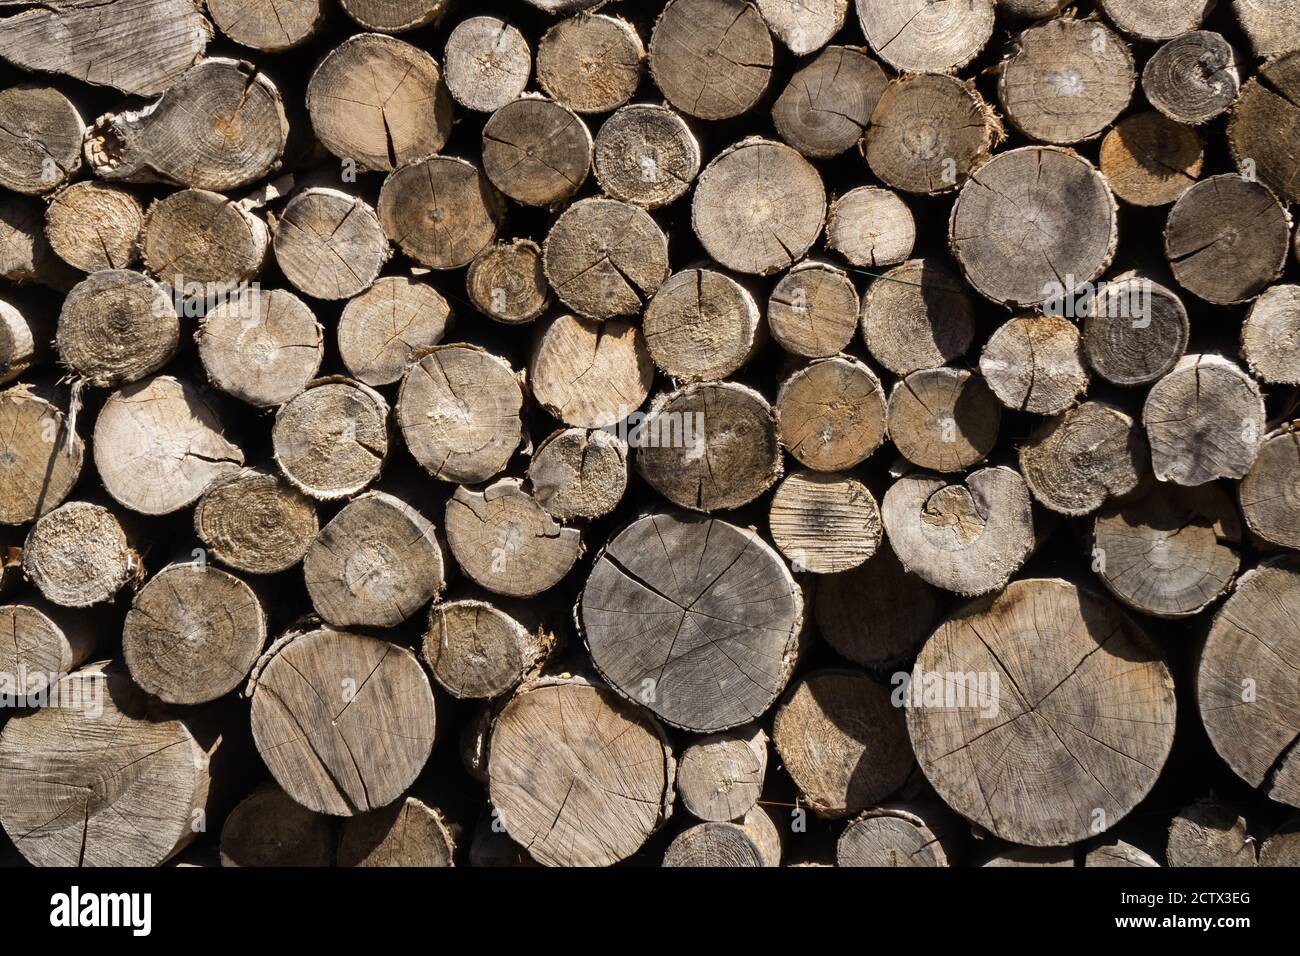 A background of round tree trunks in the foreground. Stock Photo